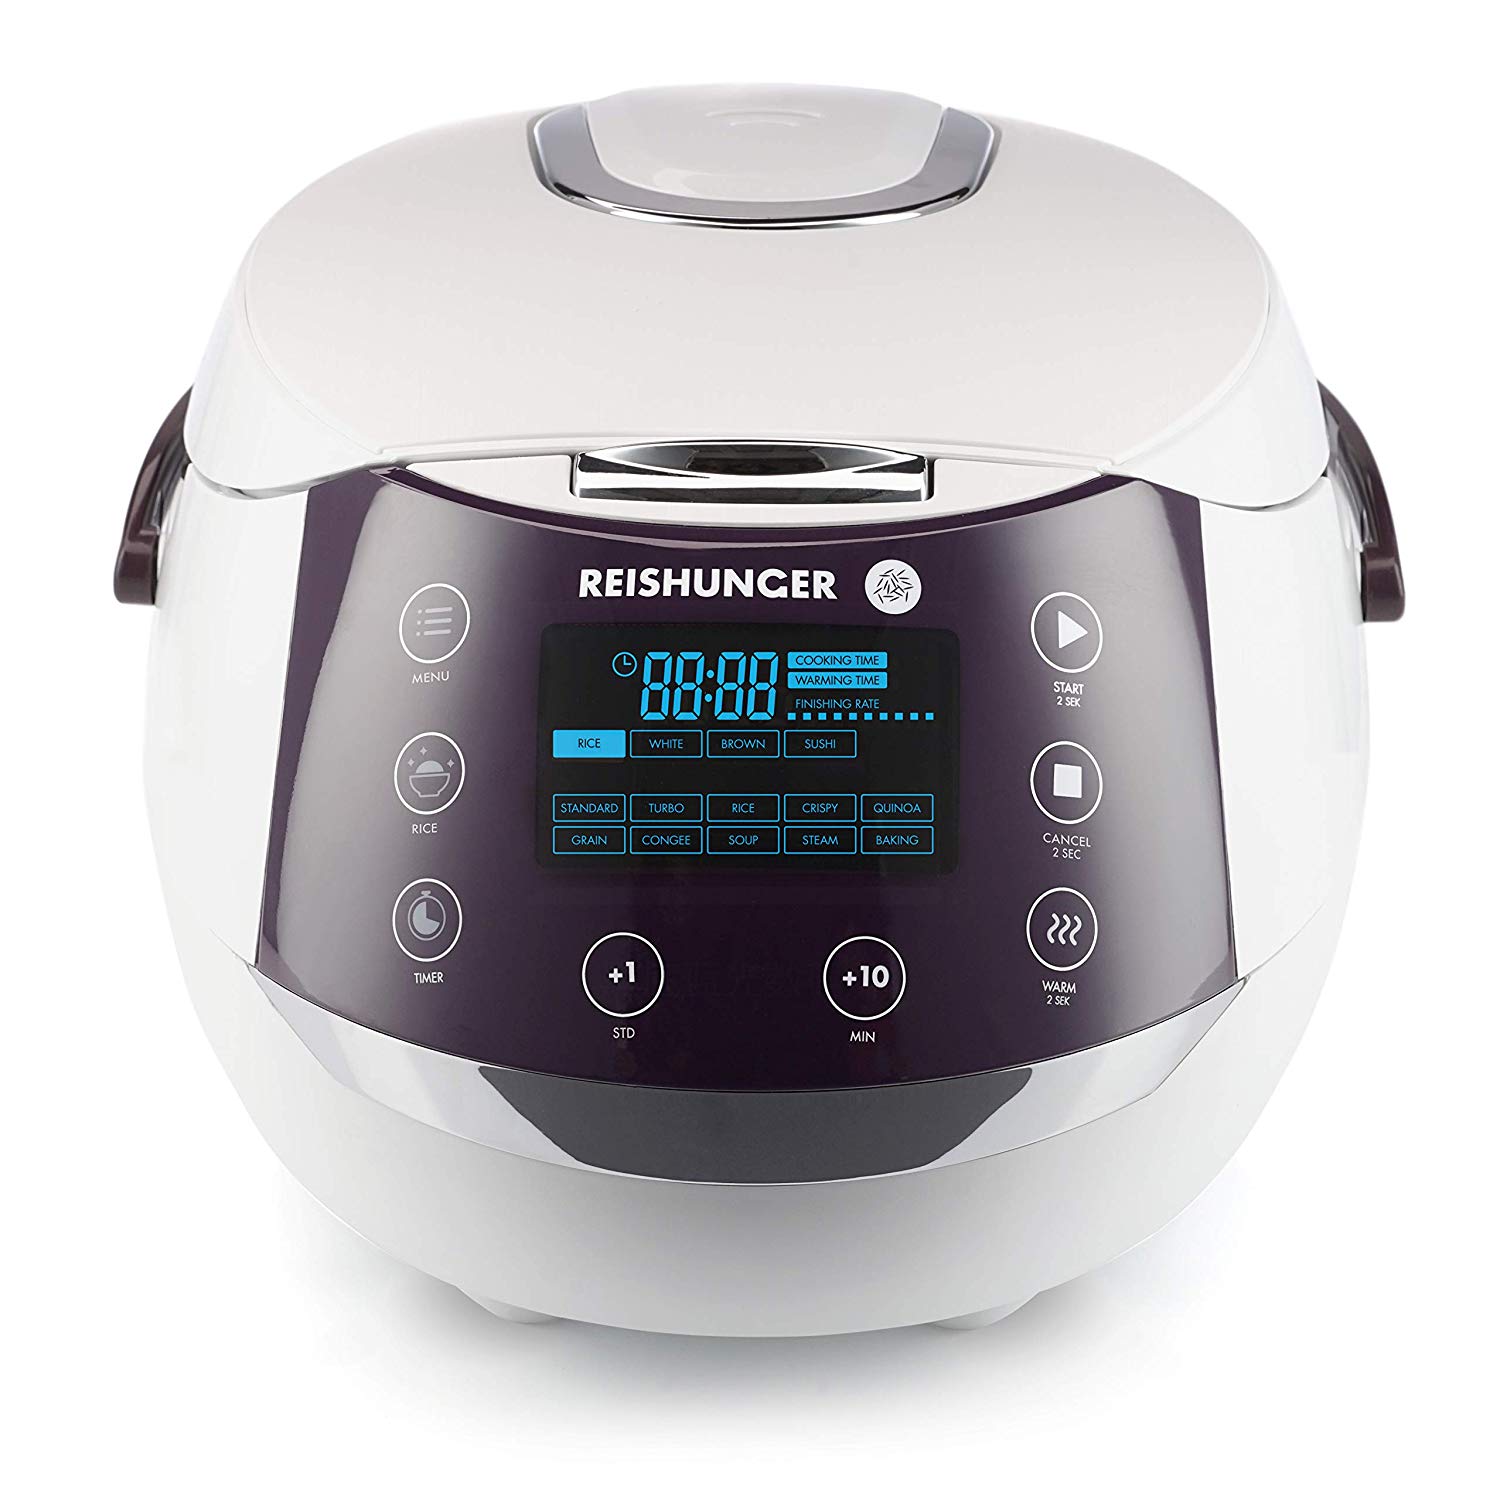 Reishunger Rice Cooker & Steamer with Keep-Warm Function - 8